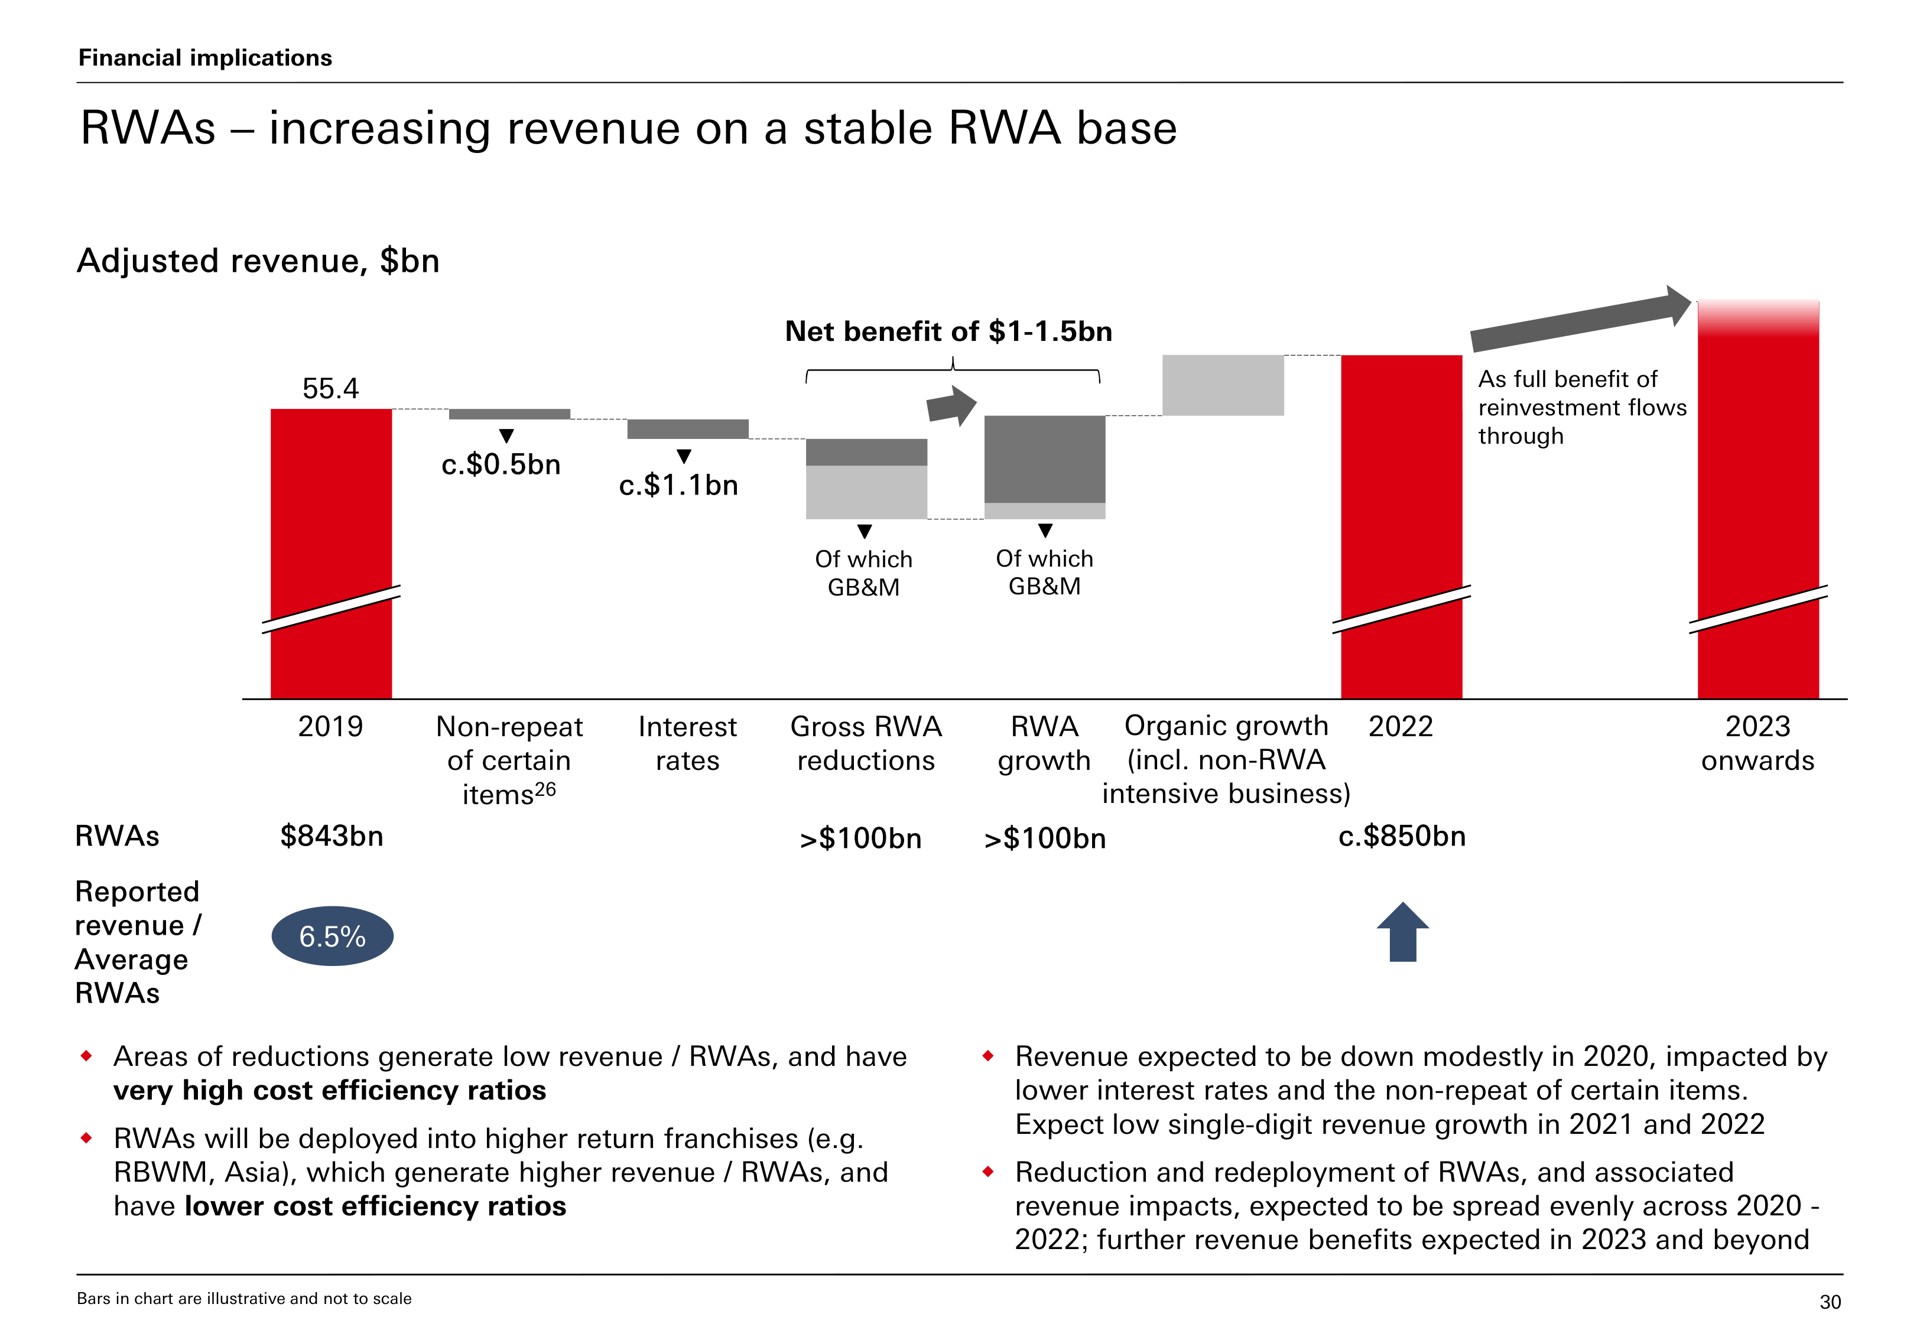 increasing revenue on a stable base | HSBC